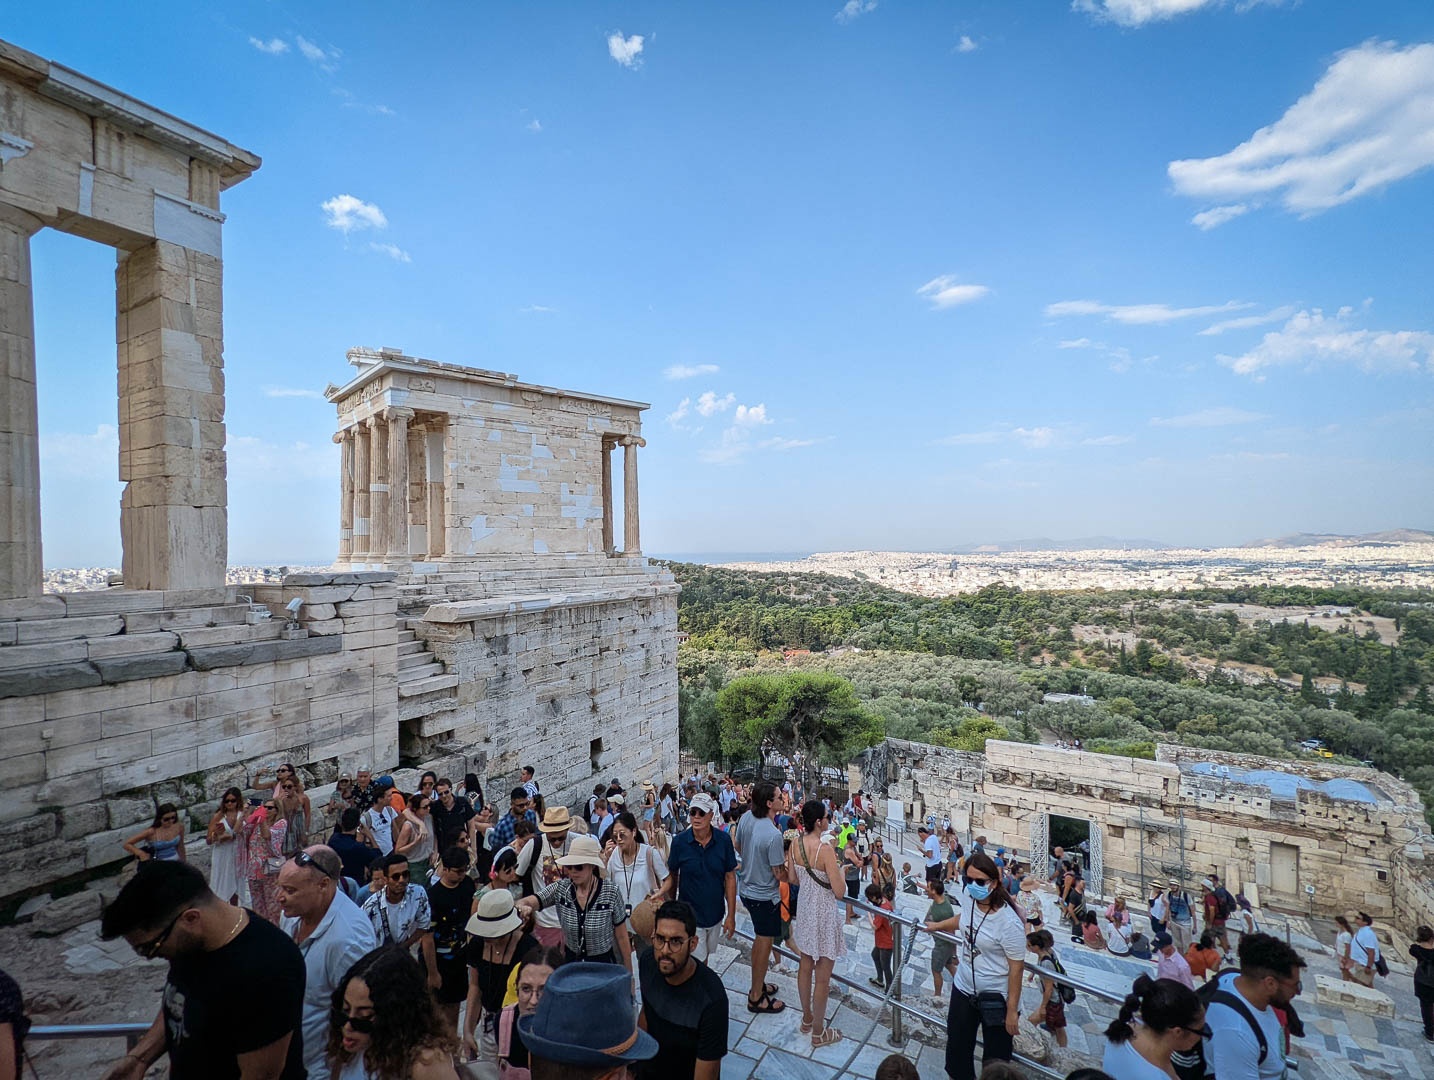 Many are those who would climb the Akropolis, the cradle of democracy.